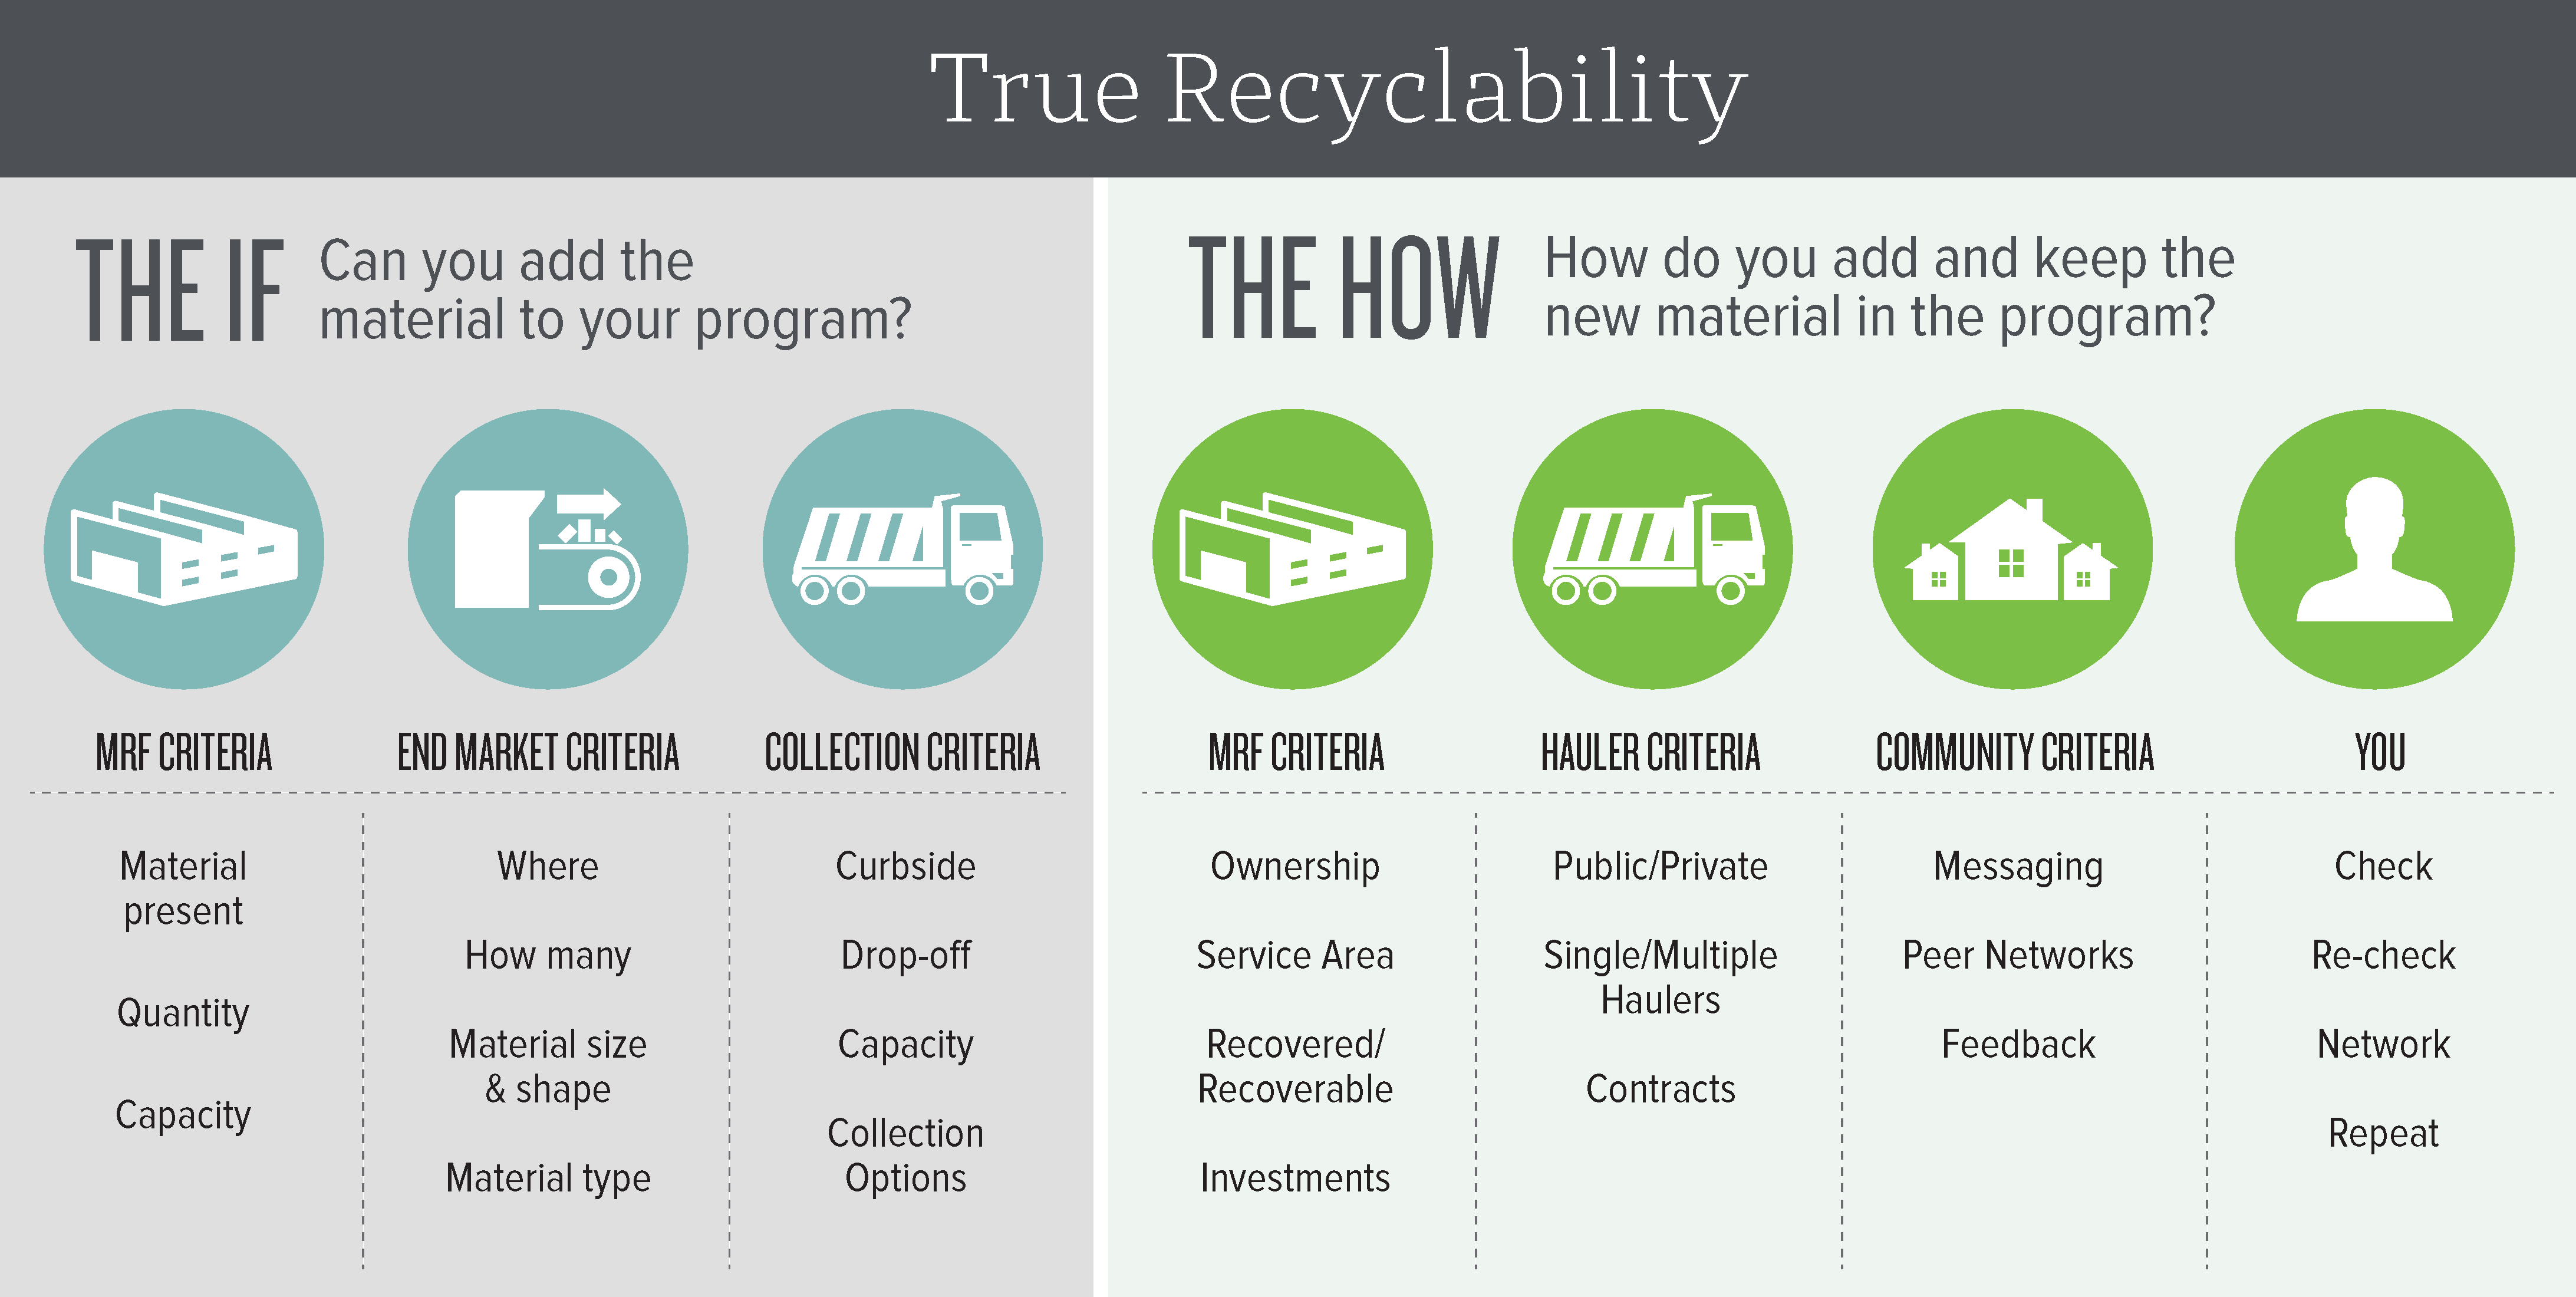 How to Add Material to Recycling Program